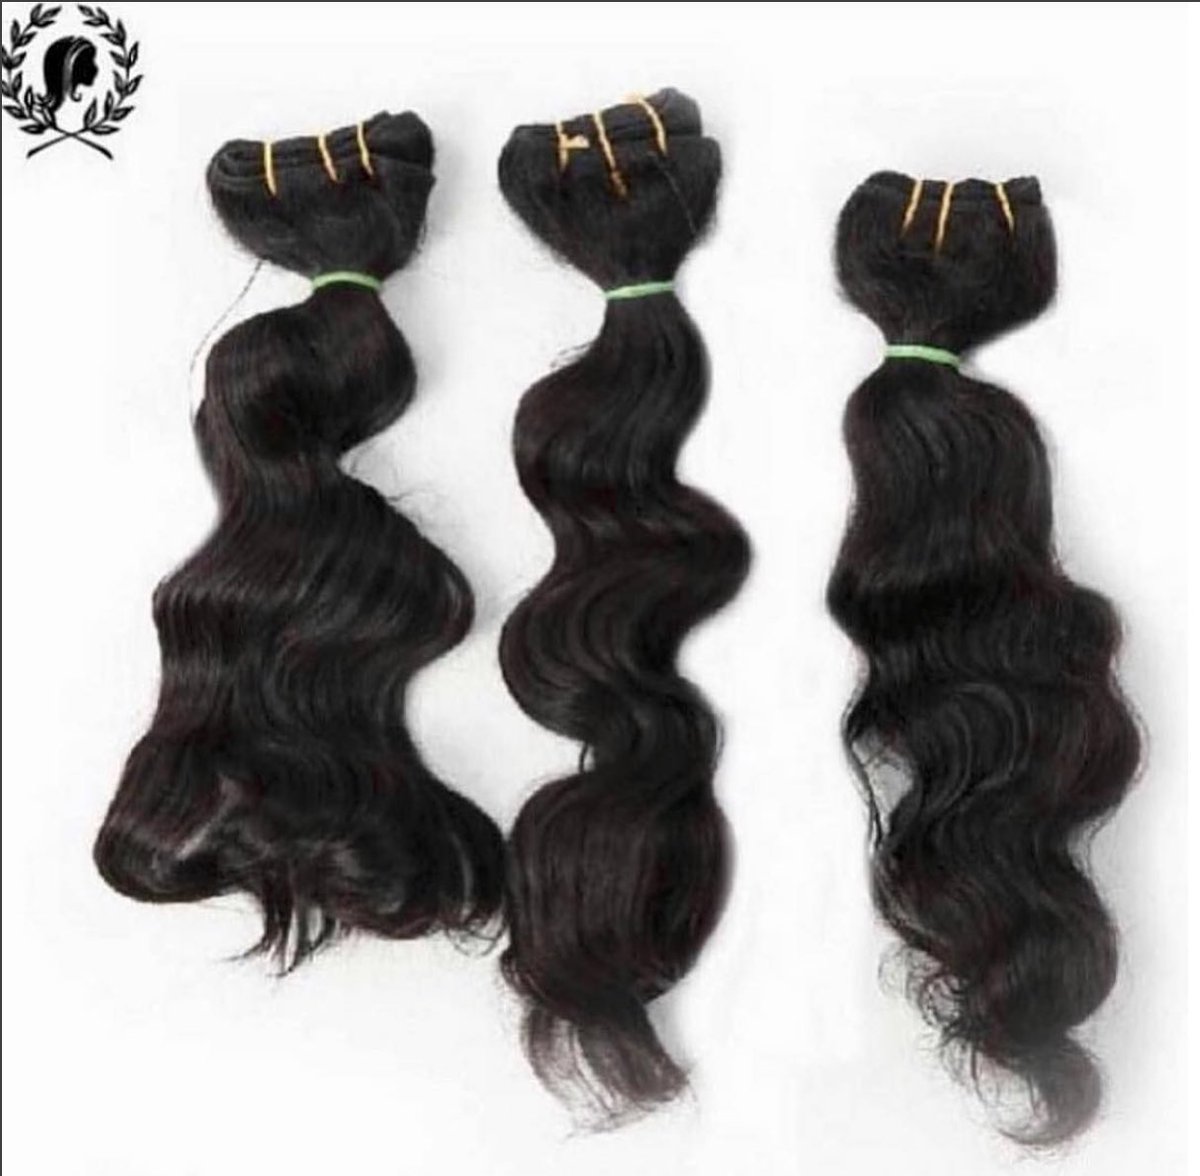 3 Bundles of our Indian Temple Wavy starts at ONLY $200‼️ (Drop mic 🎤) #IndianVirginHair #FactoryDirectPrices ✨pureindianhair.com✨